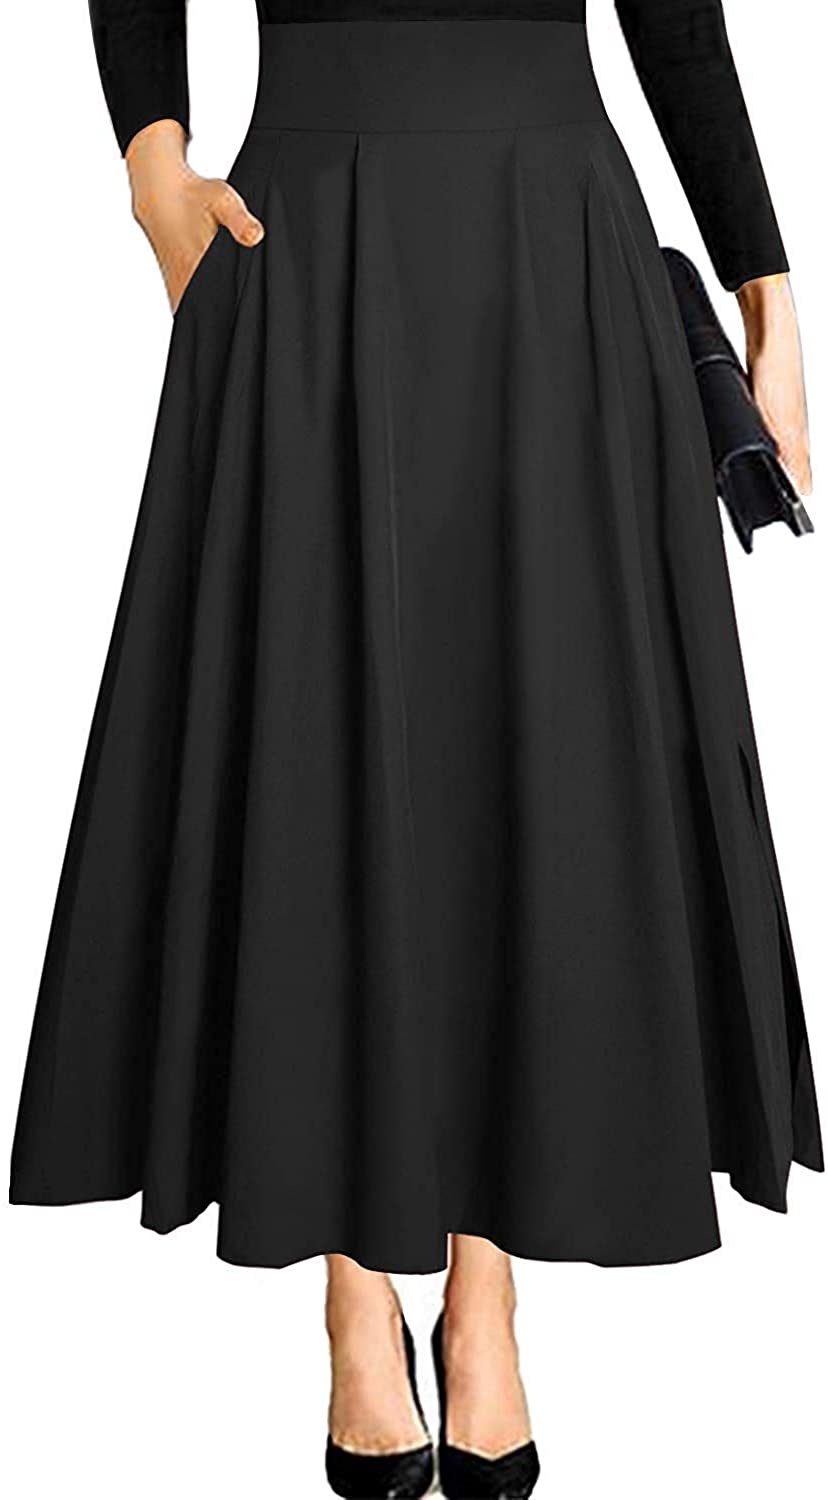 RANPHEE Women's Ankle Length High Waist A-line Flowy Long Maxi Skirt with  Pocket